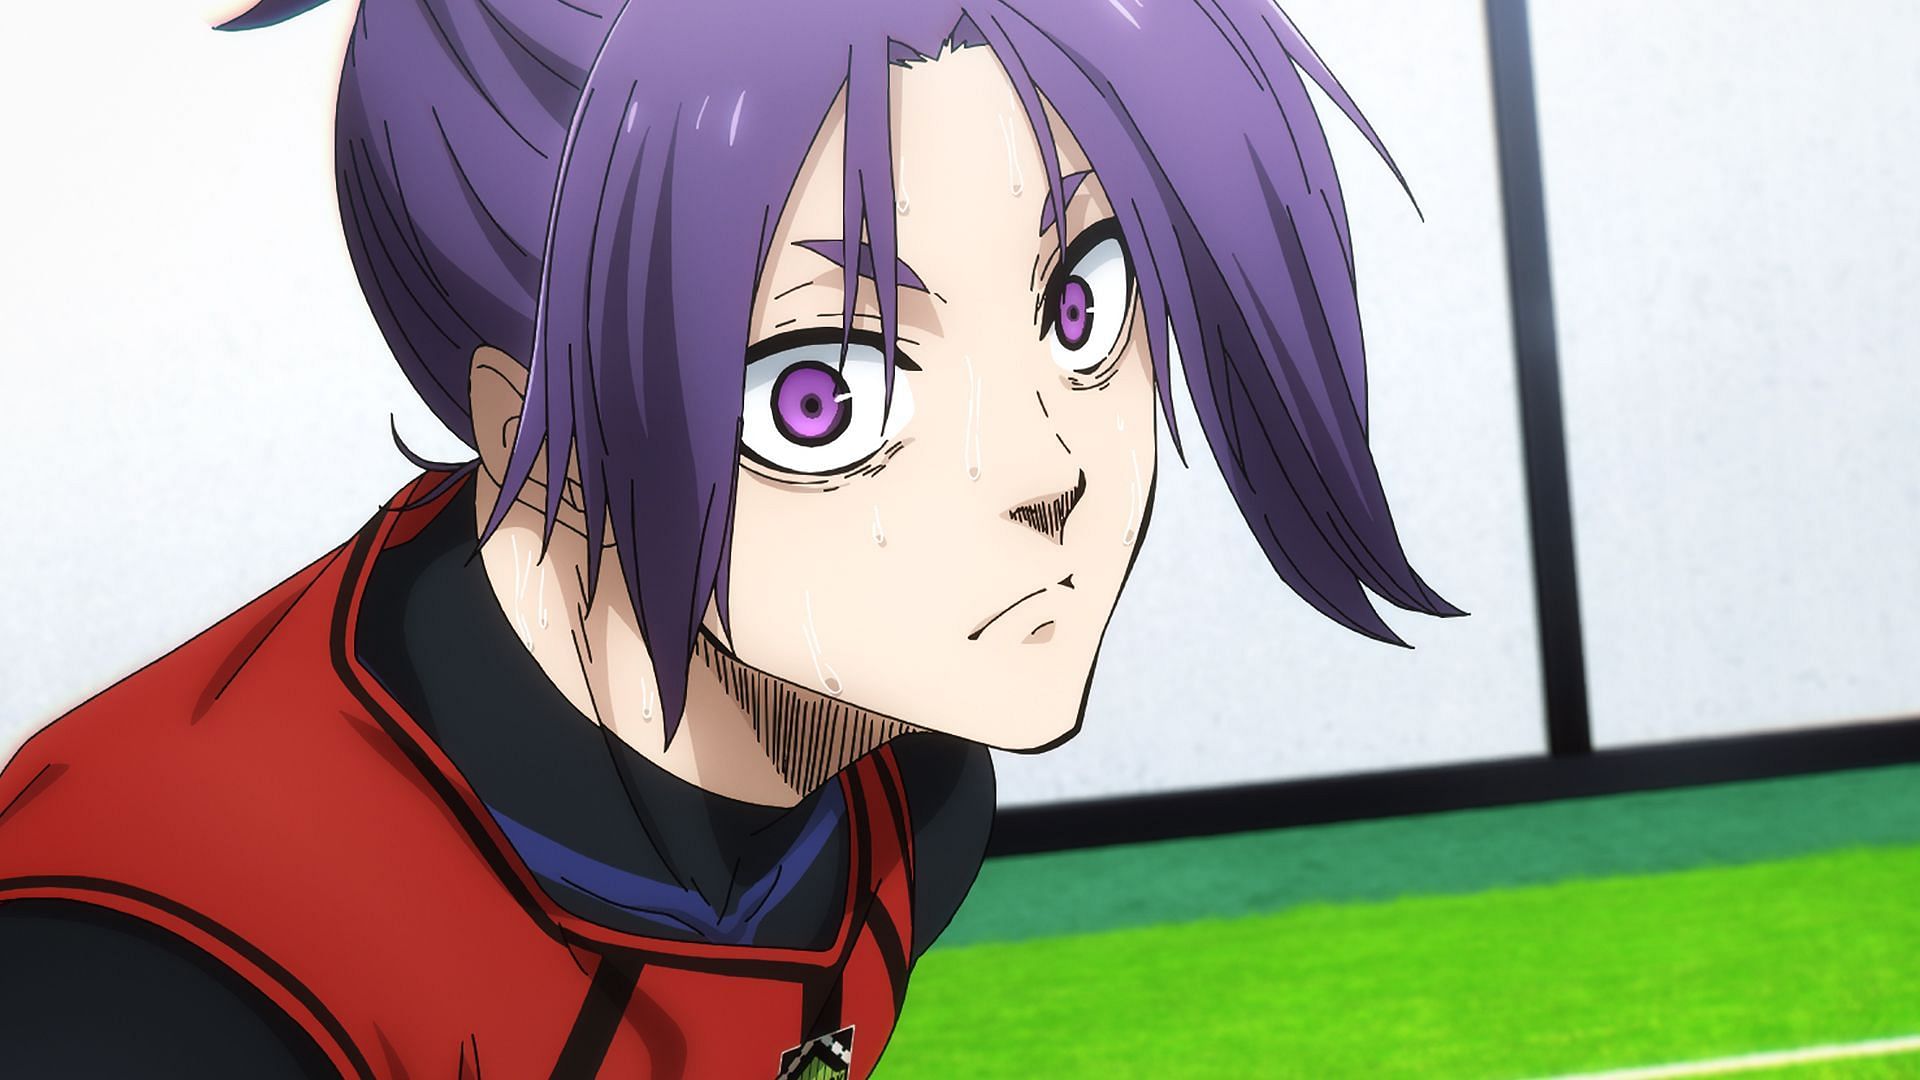 Reo Mikage as seen in the anime (Image via 8bit)